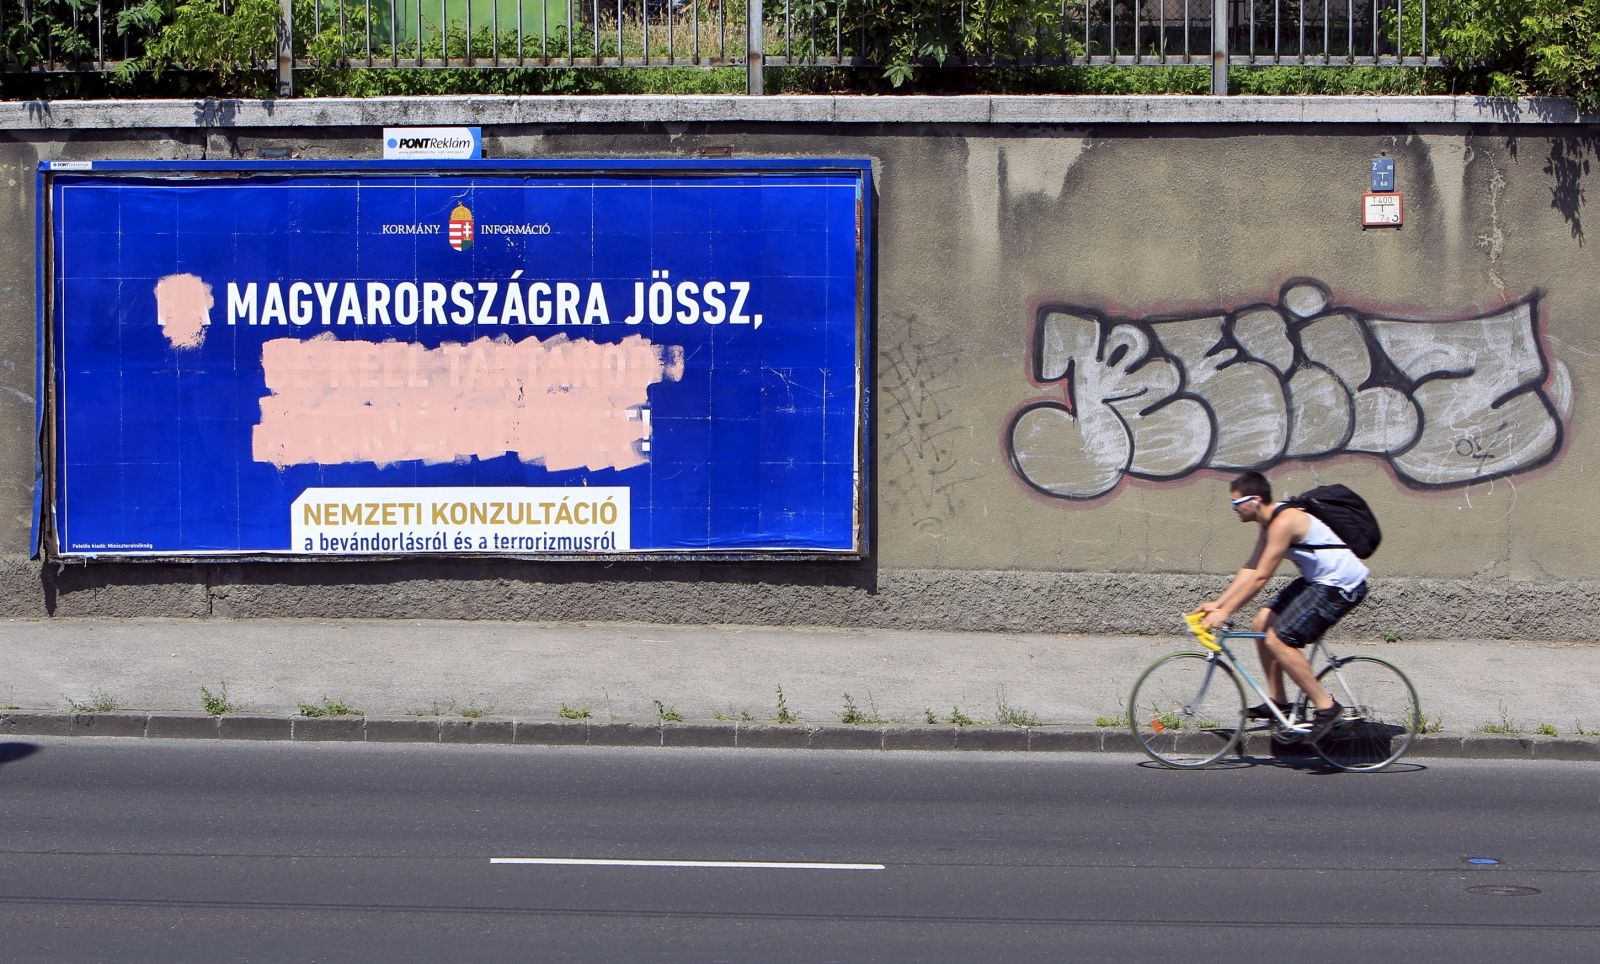 Hungarian counter anti-immigration posters